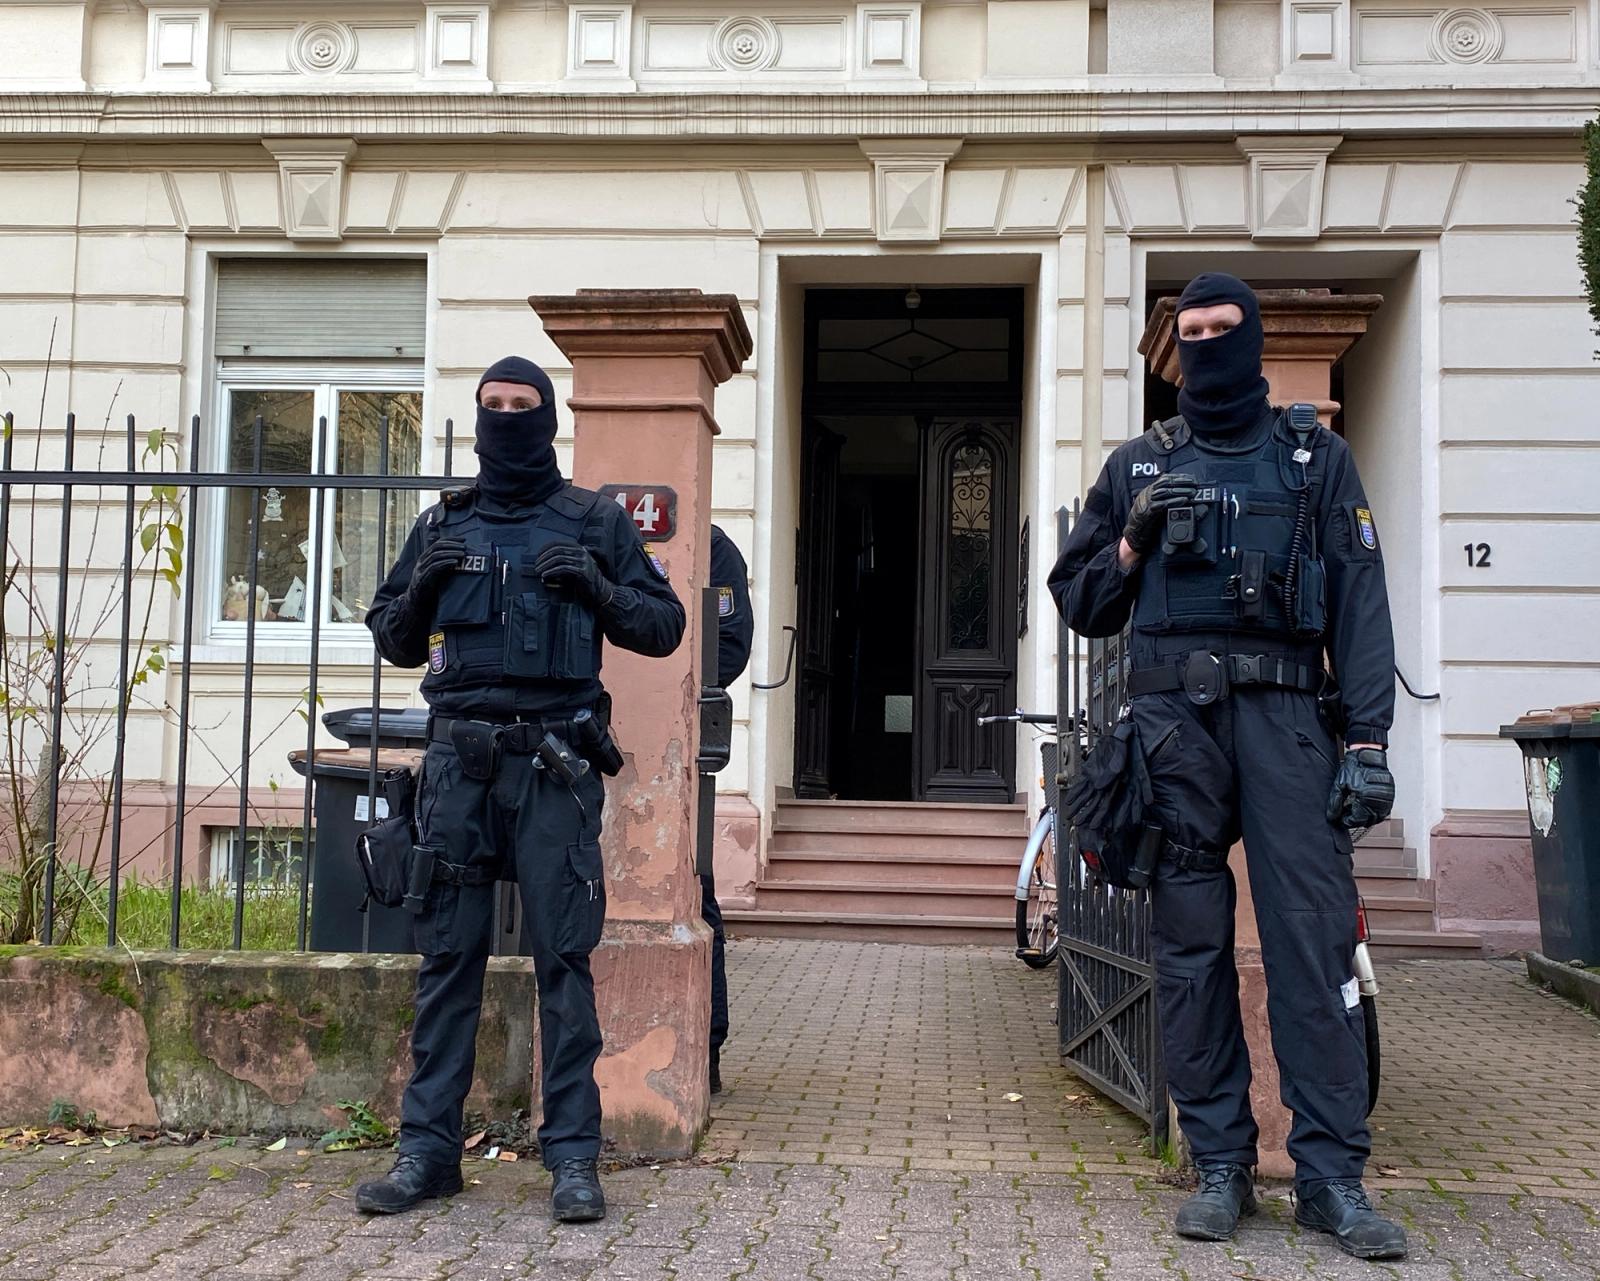 Police secures the area after 25 suspected members and supporters of a far-right terrorist group were detained during raids across Germany, in Frankfurt, Germany 